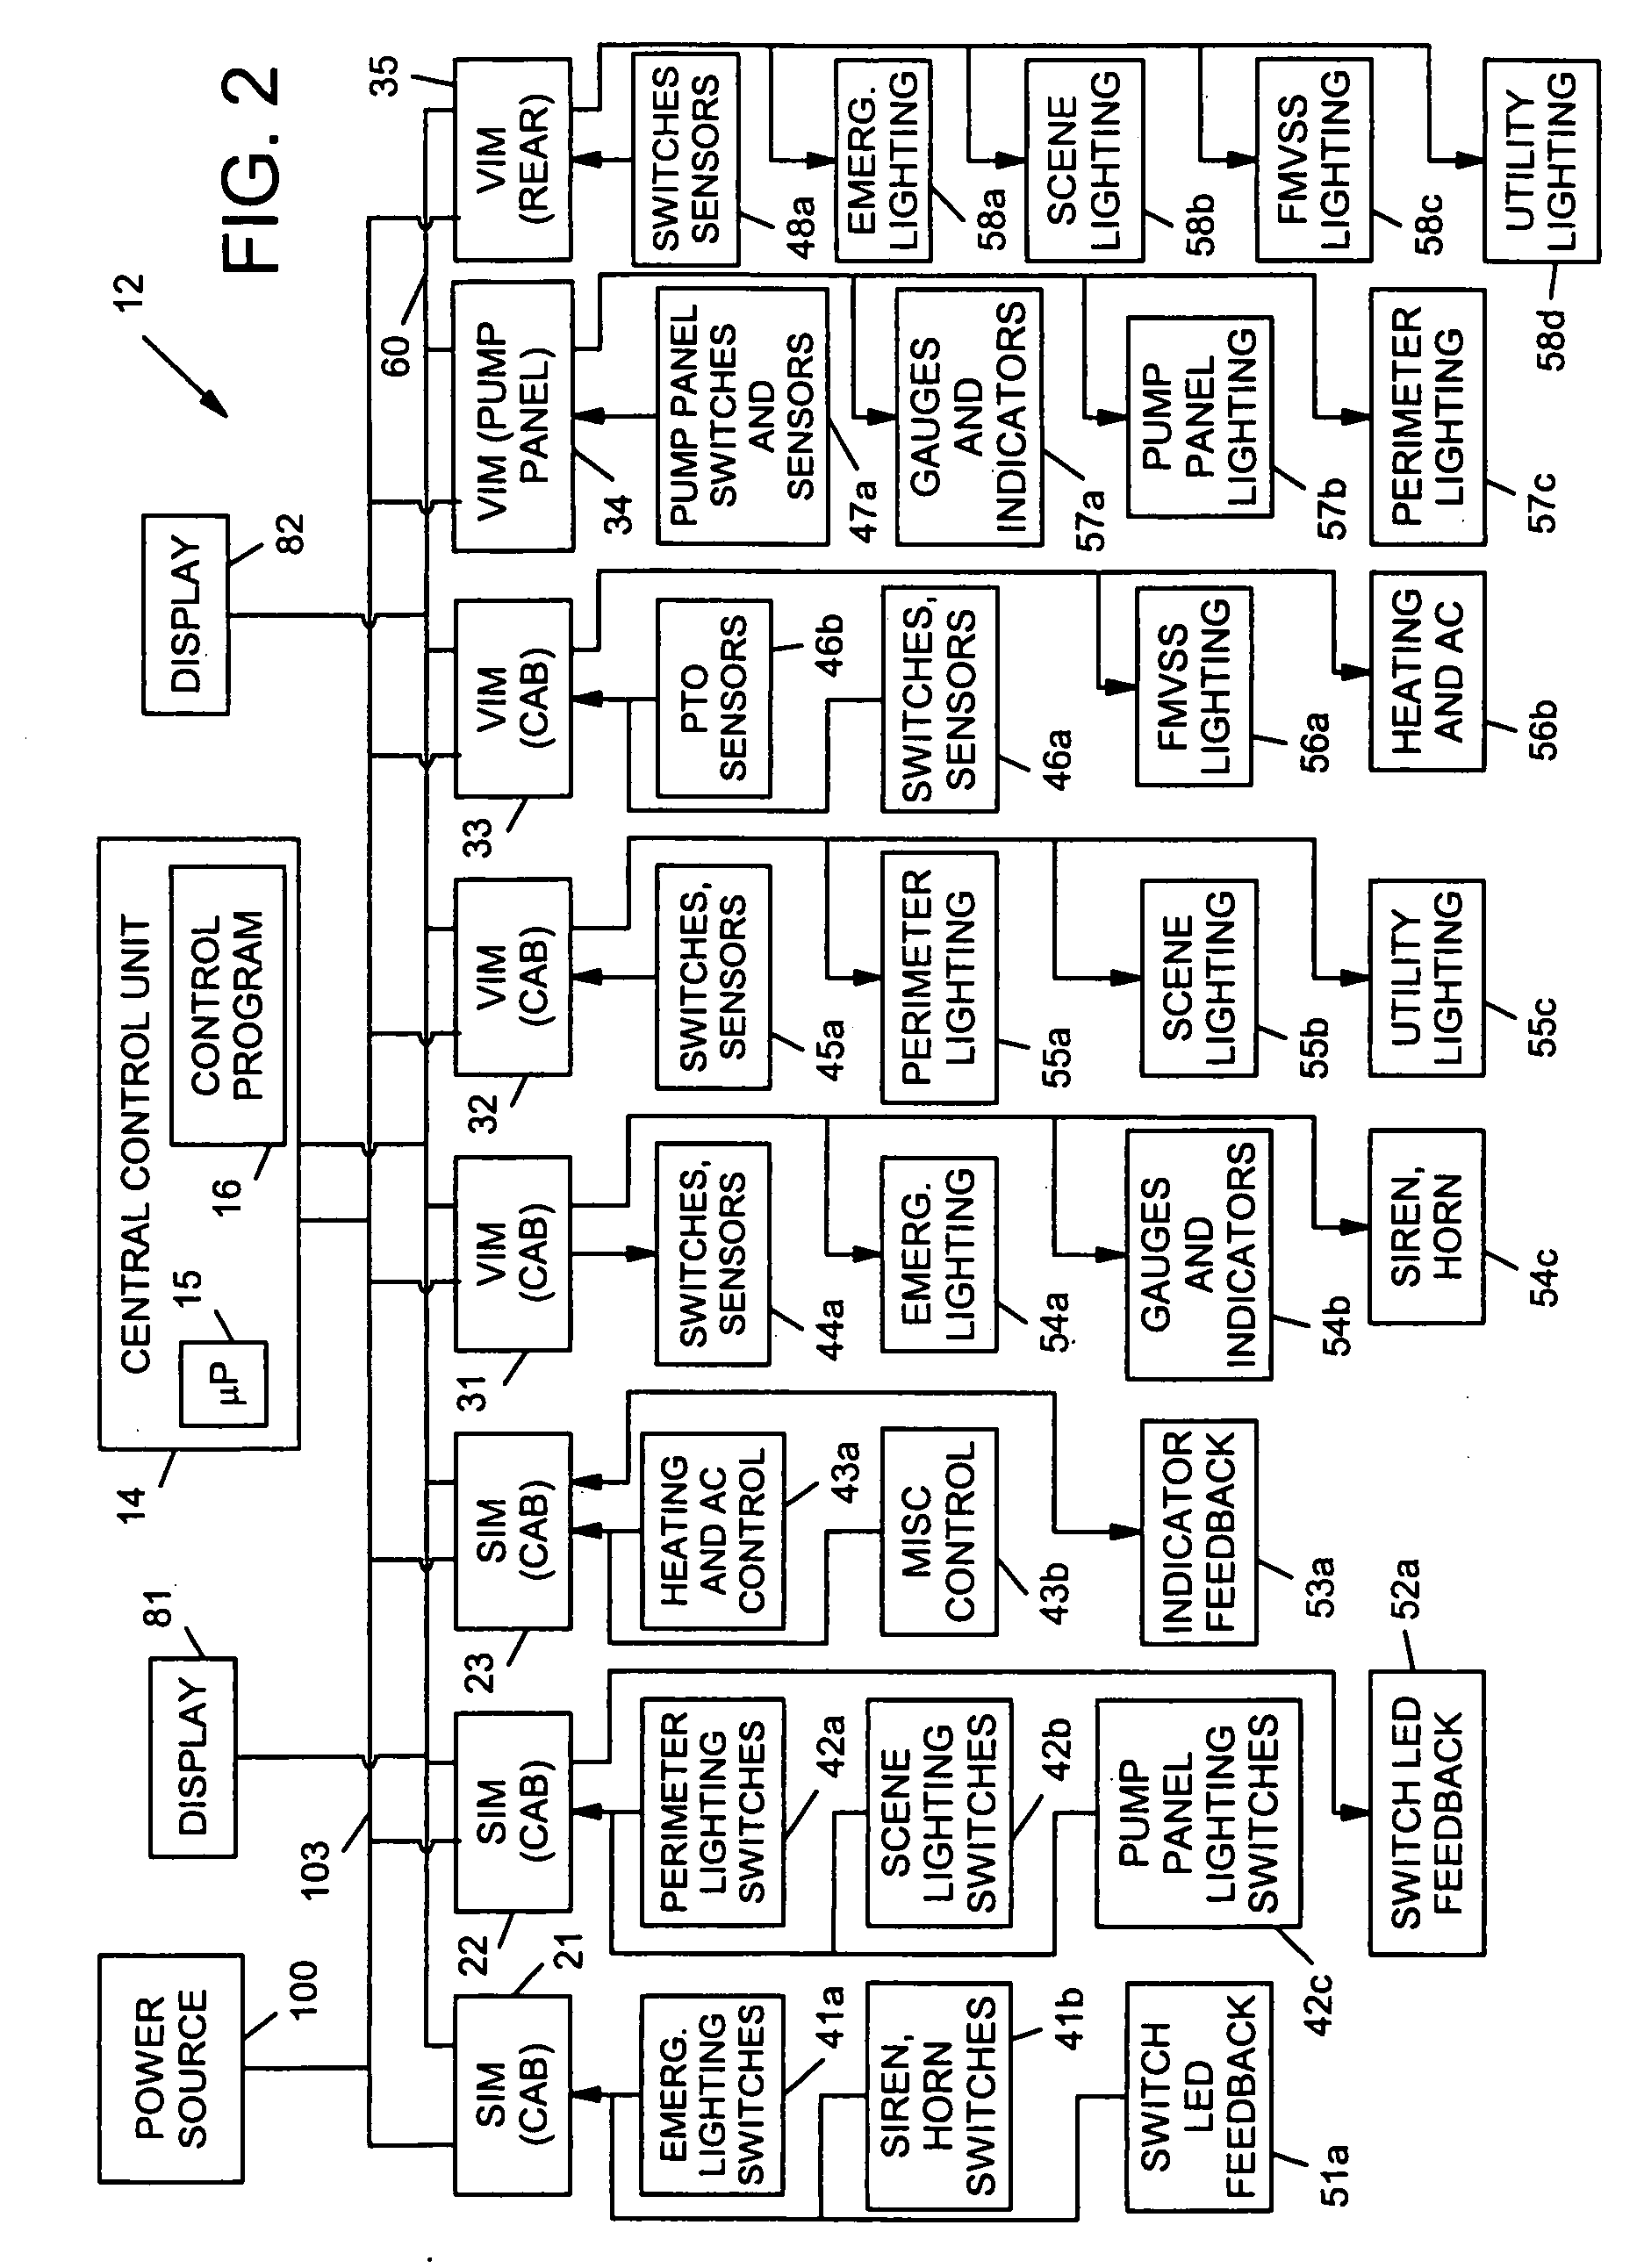 Firefighting vehicle and method with network-assisted scene management